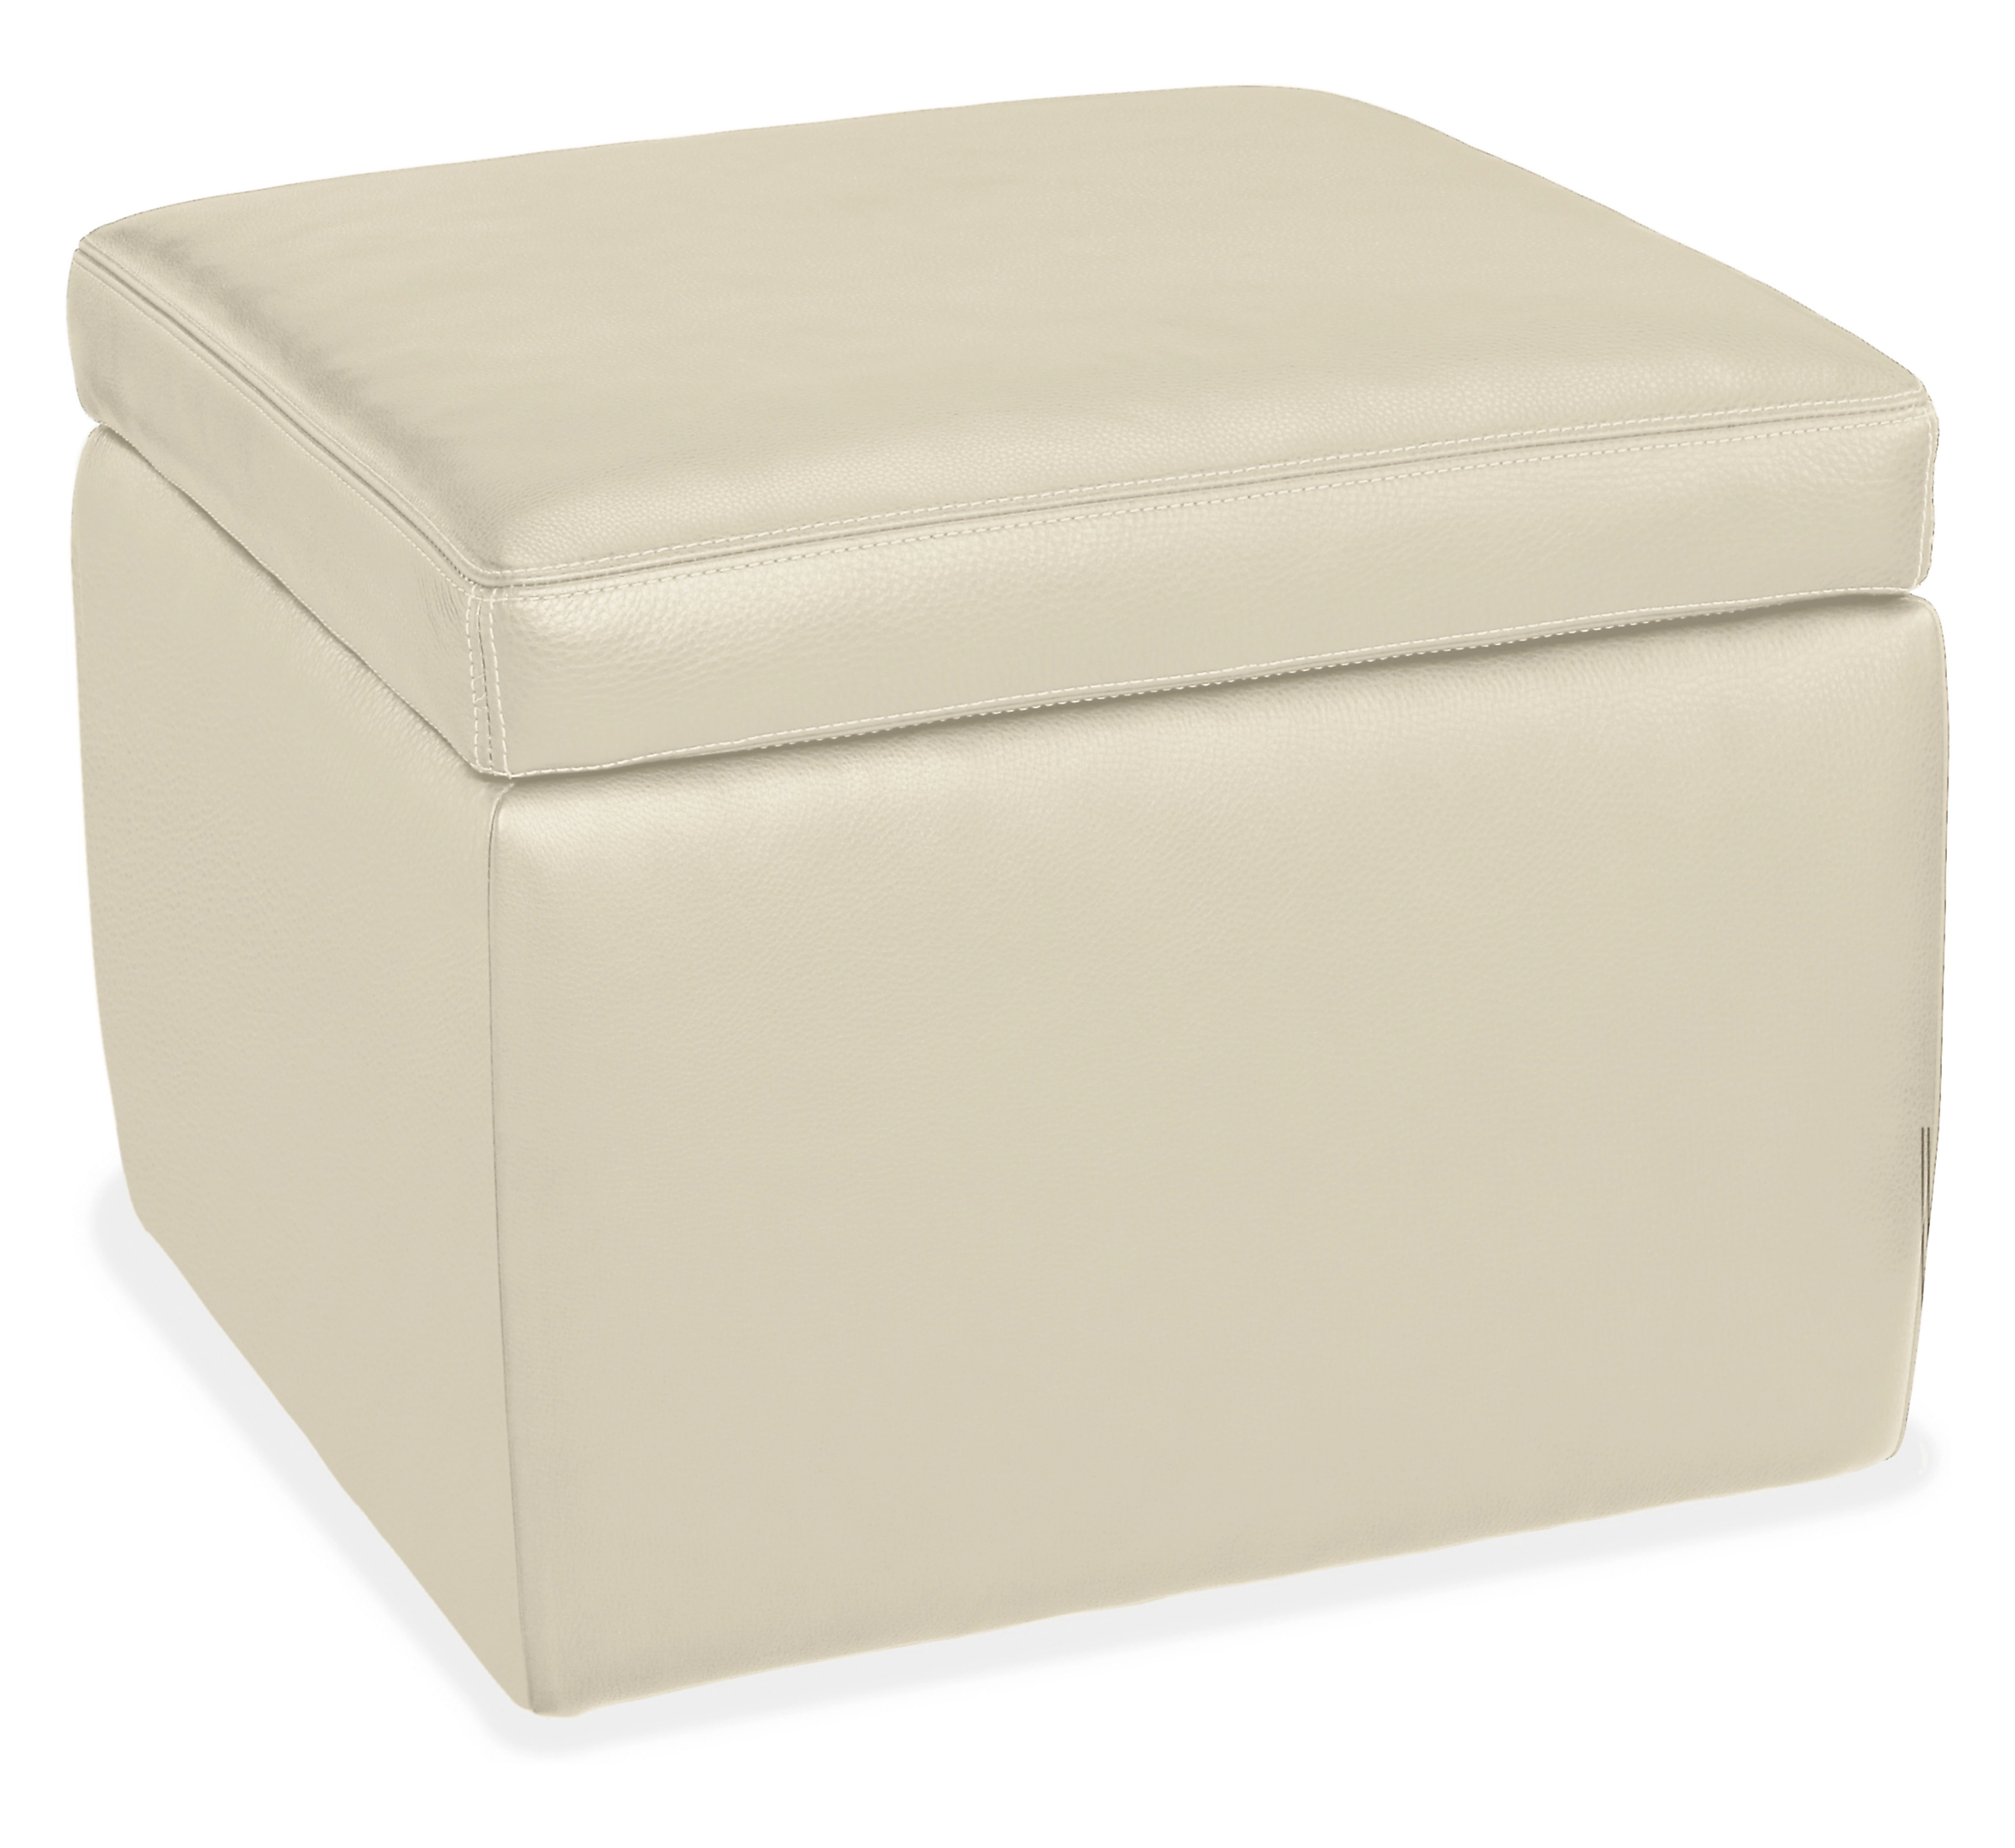 Tyler 21w 21d 17h Square Storage Ottoman in Urbino Ivory Leather